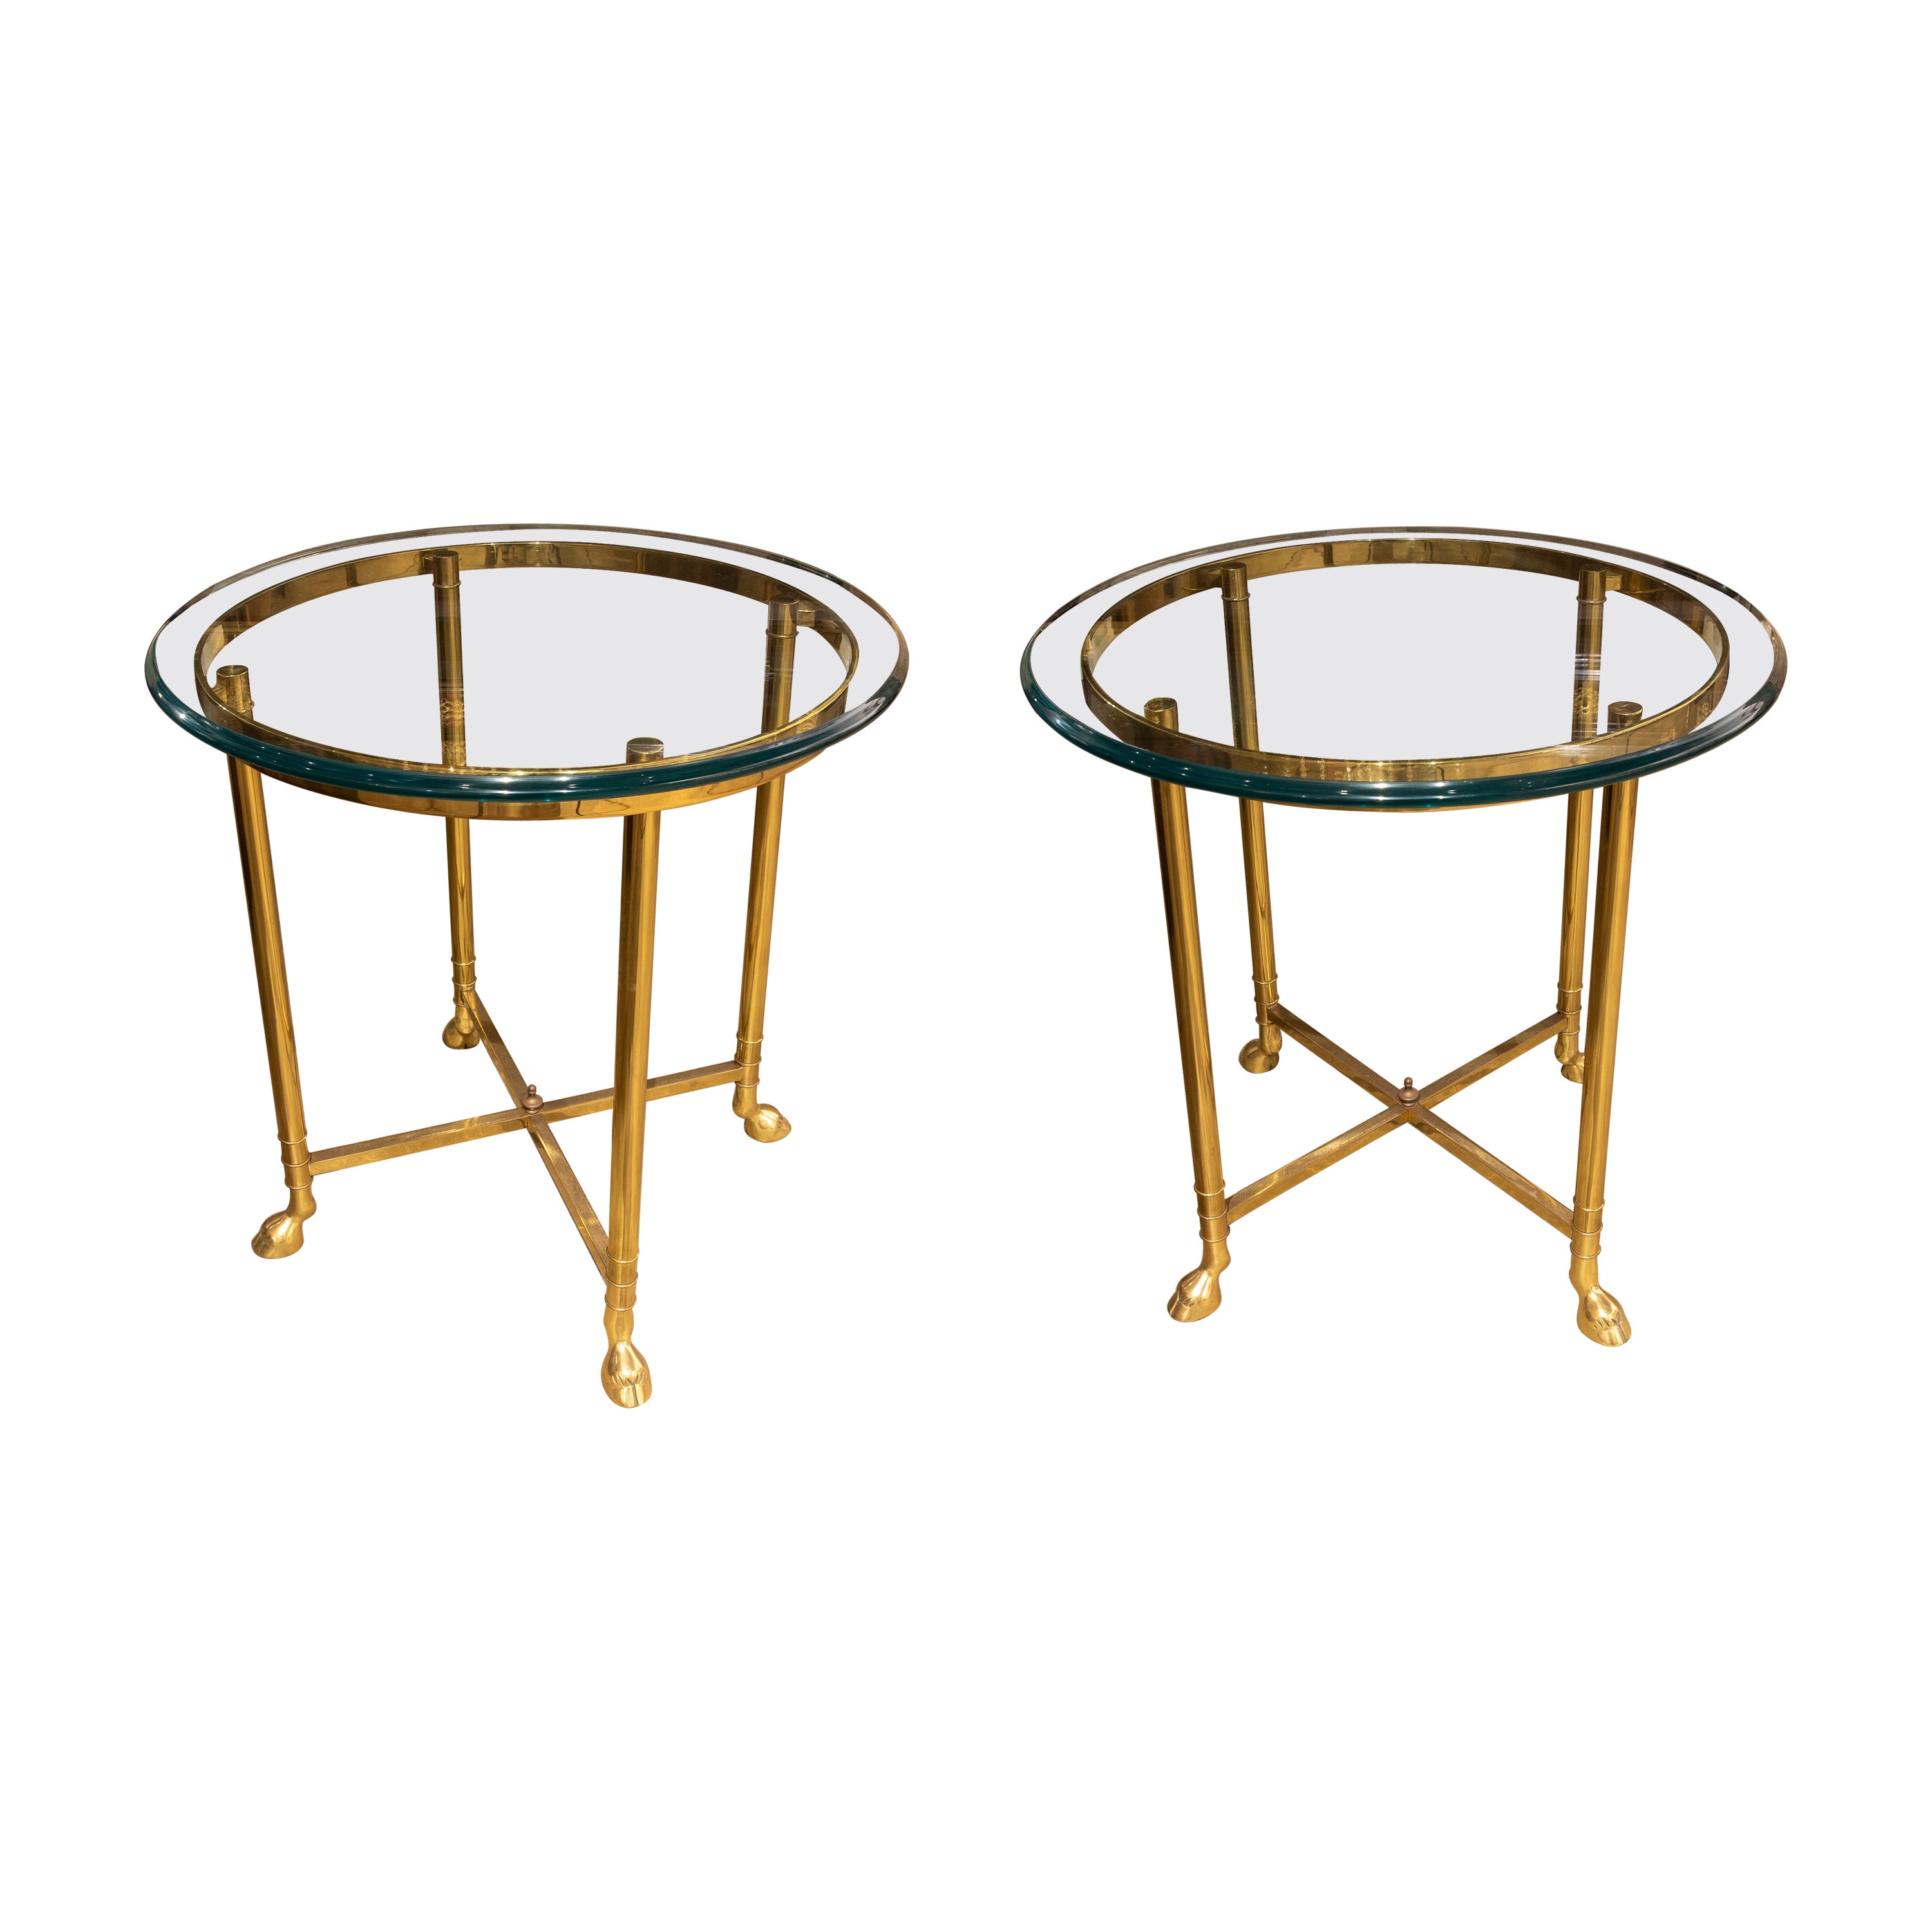 1970s French Pair of Gilded Bronze and Glass Tables